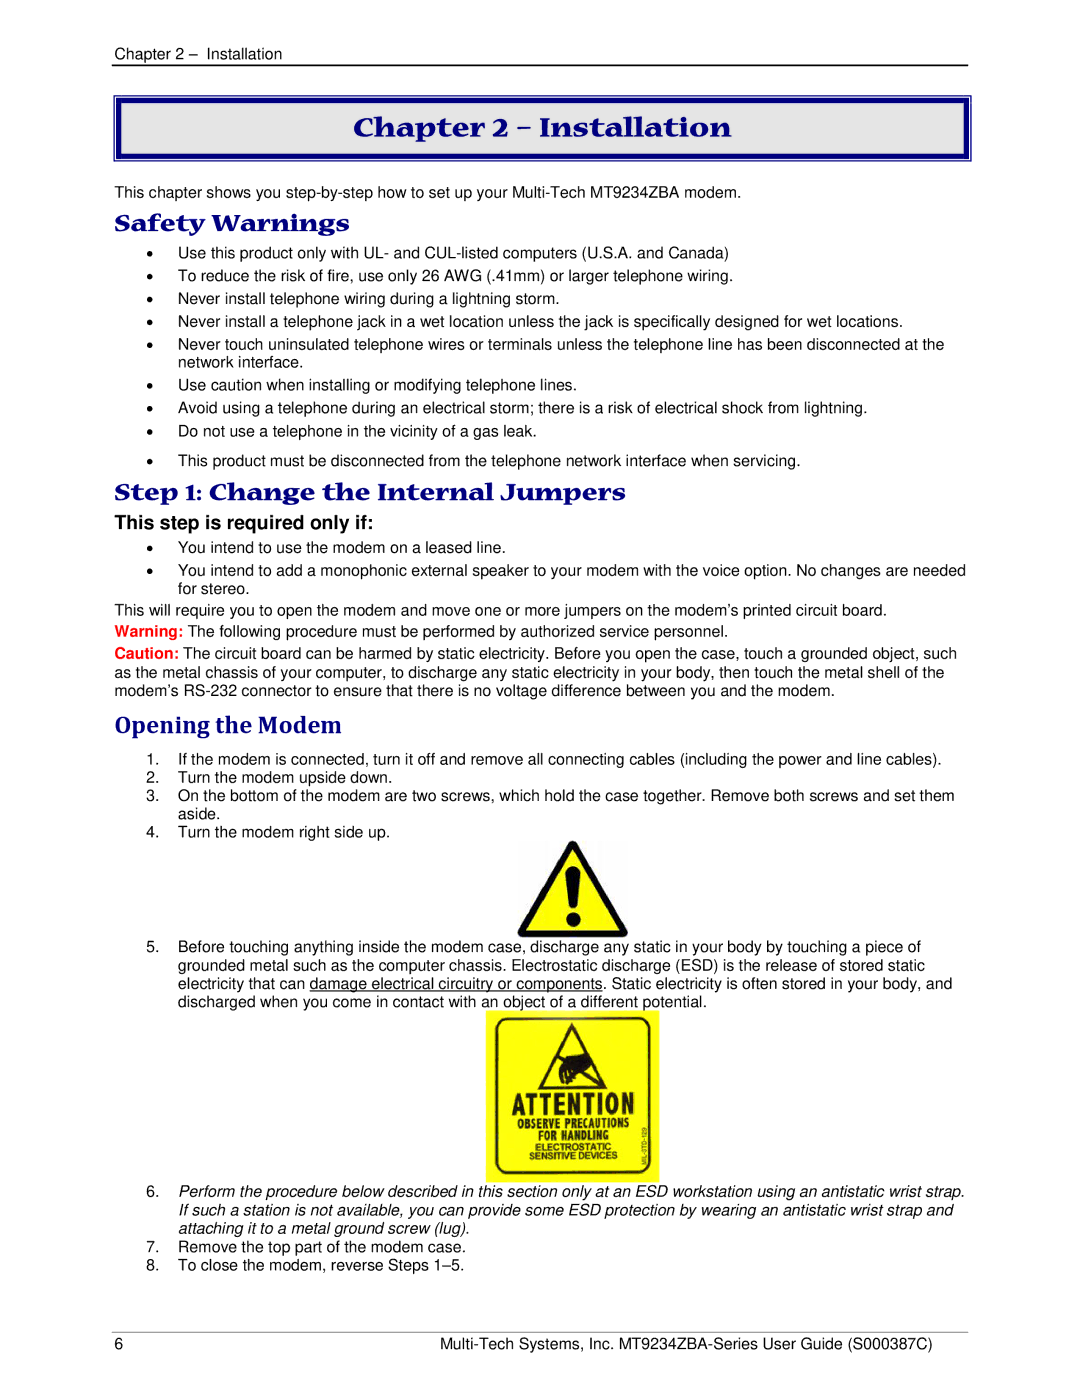 Multi-Tech Systems MT9234ZBA-V manual Installation, Safety Warnings, Change the Internal Jumpers, Opening the Modem 